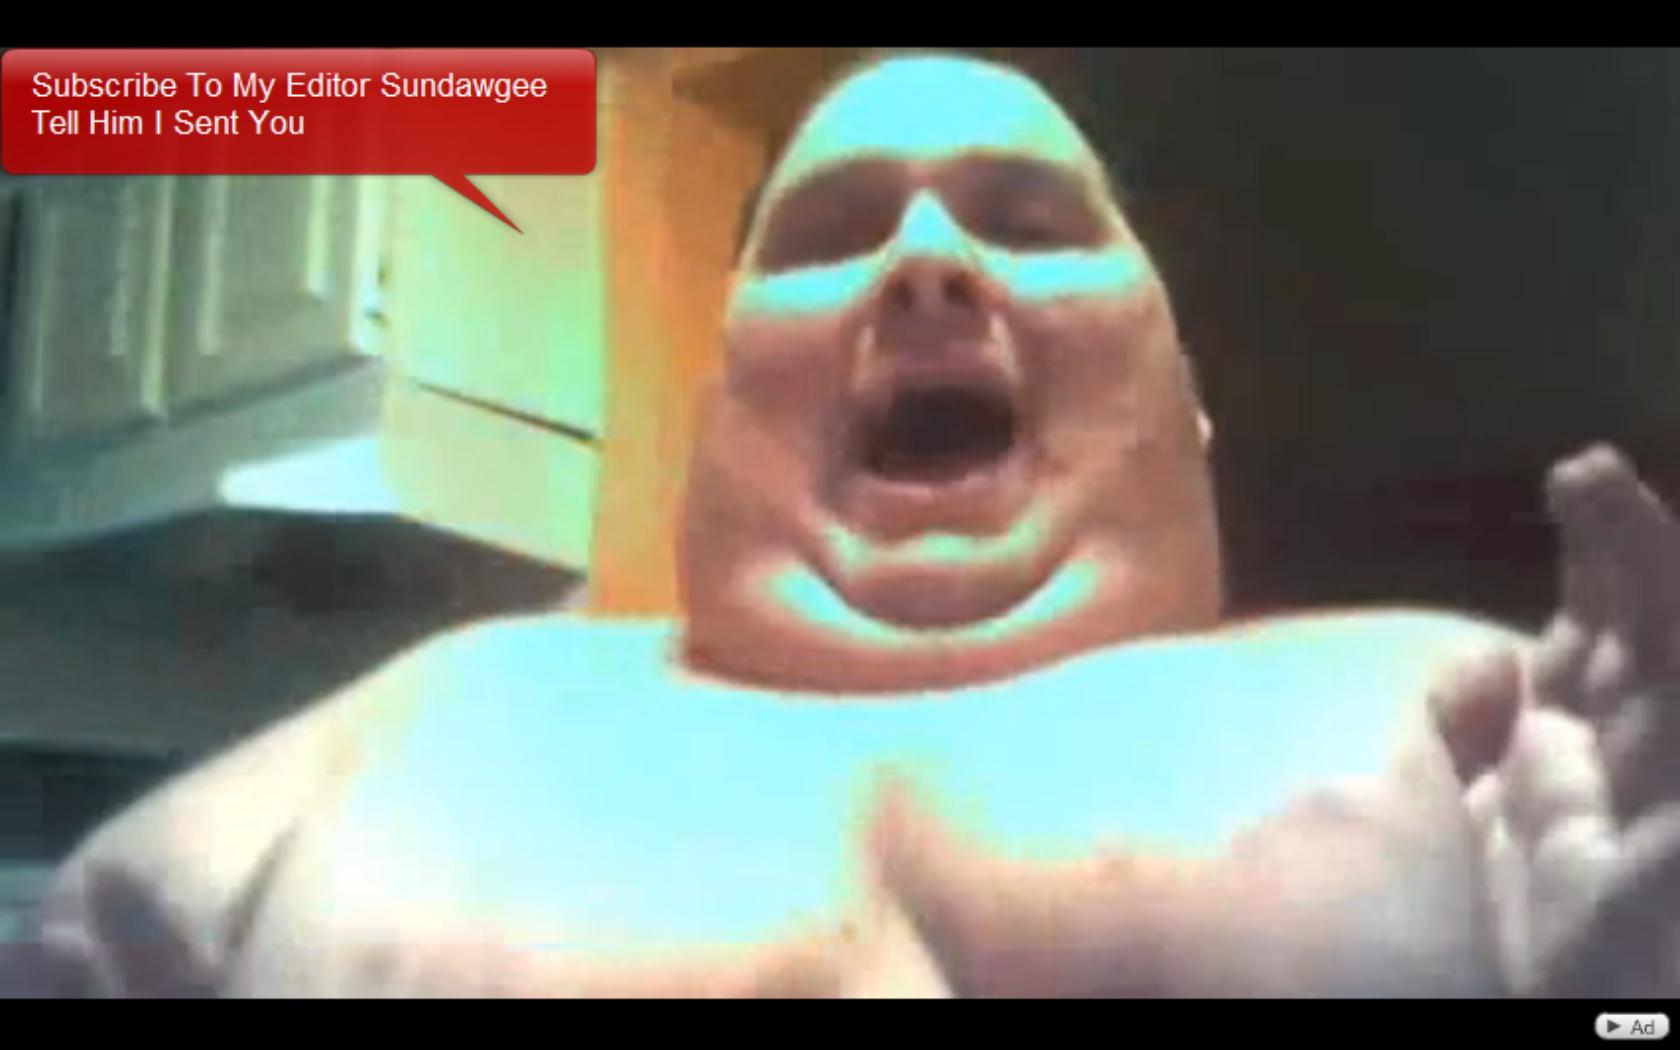 Fat dude I found on blogtv. LOOK AT EM TITIES!!